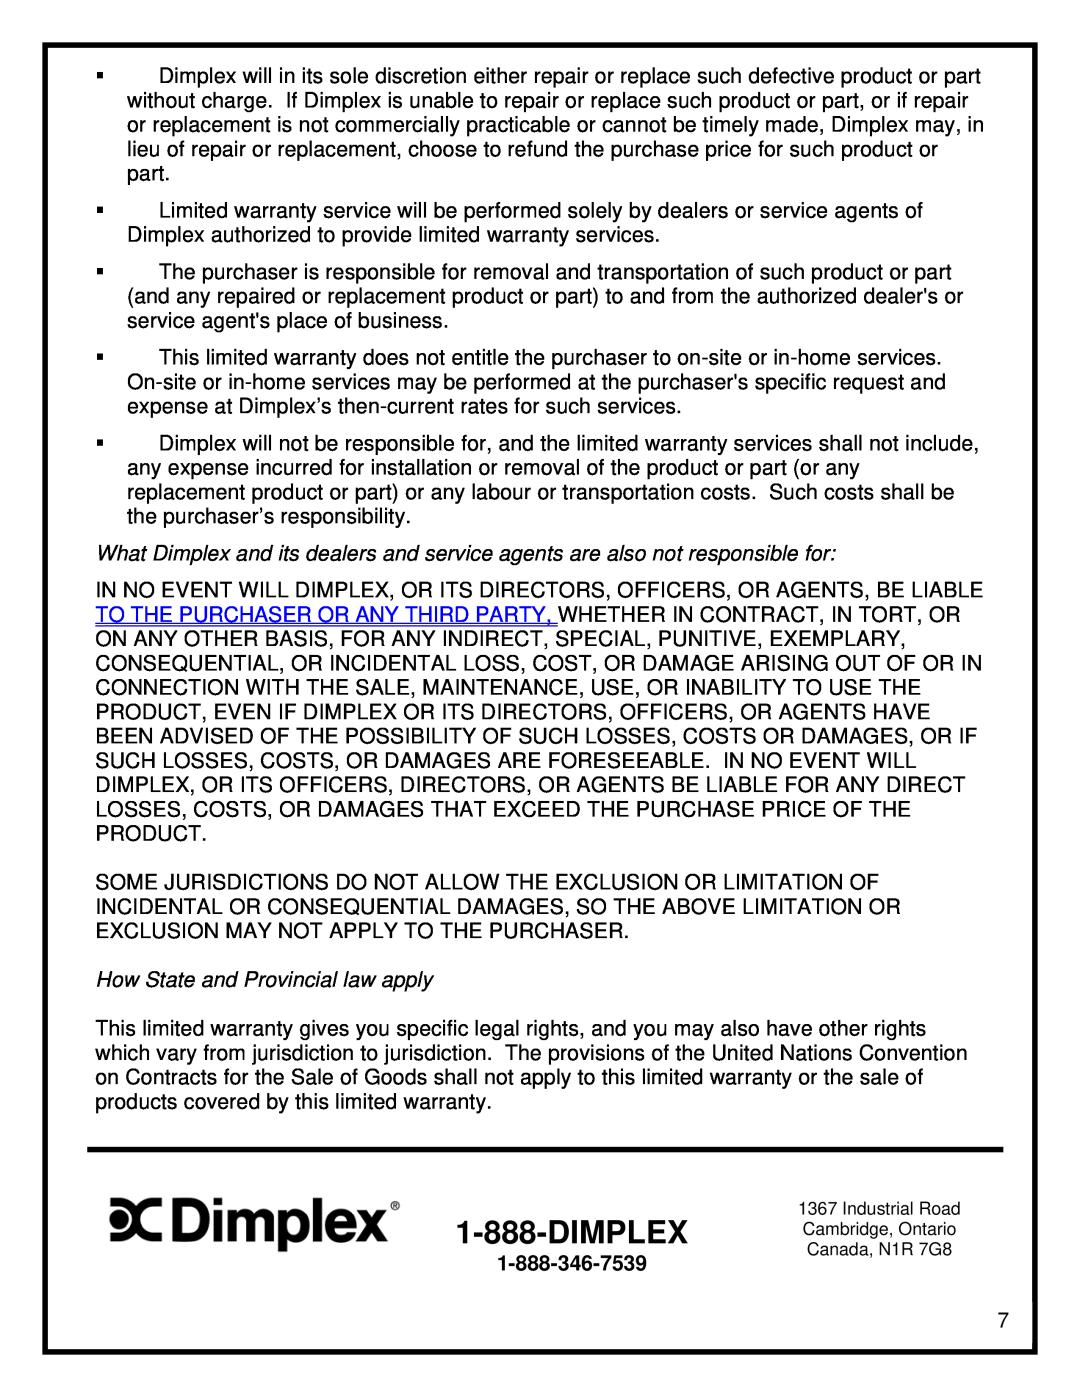 Dimplex DFO2607 manual How State and Provincial law apply 